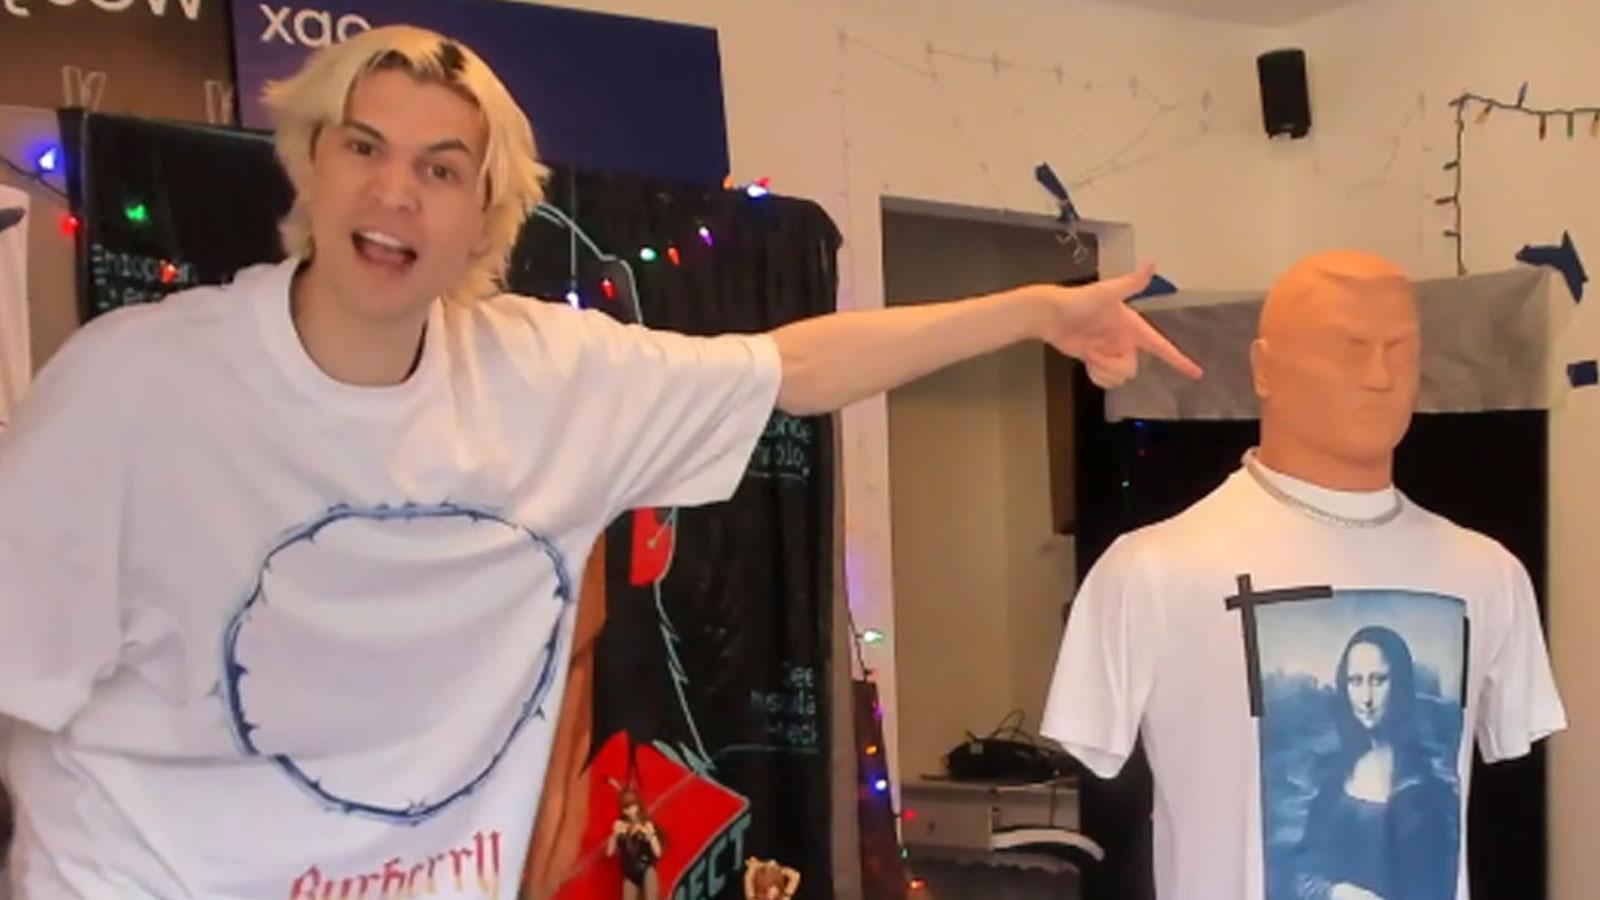 xQc standing and pointing at his freestanding dummy